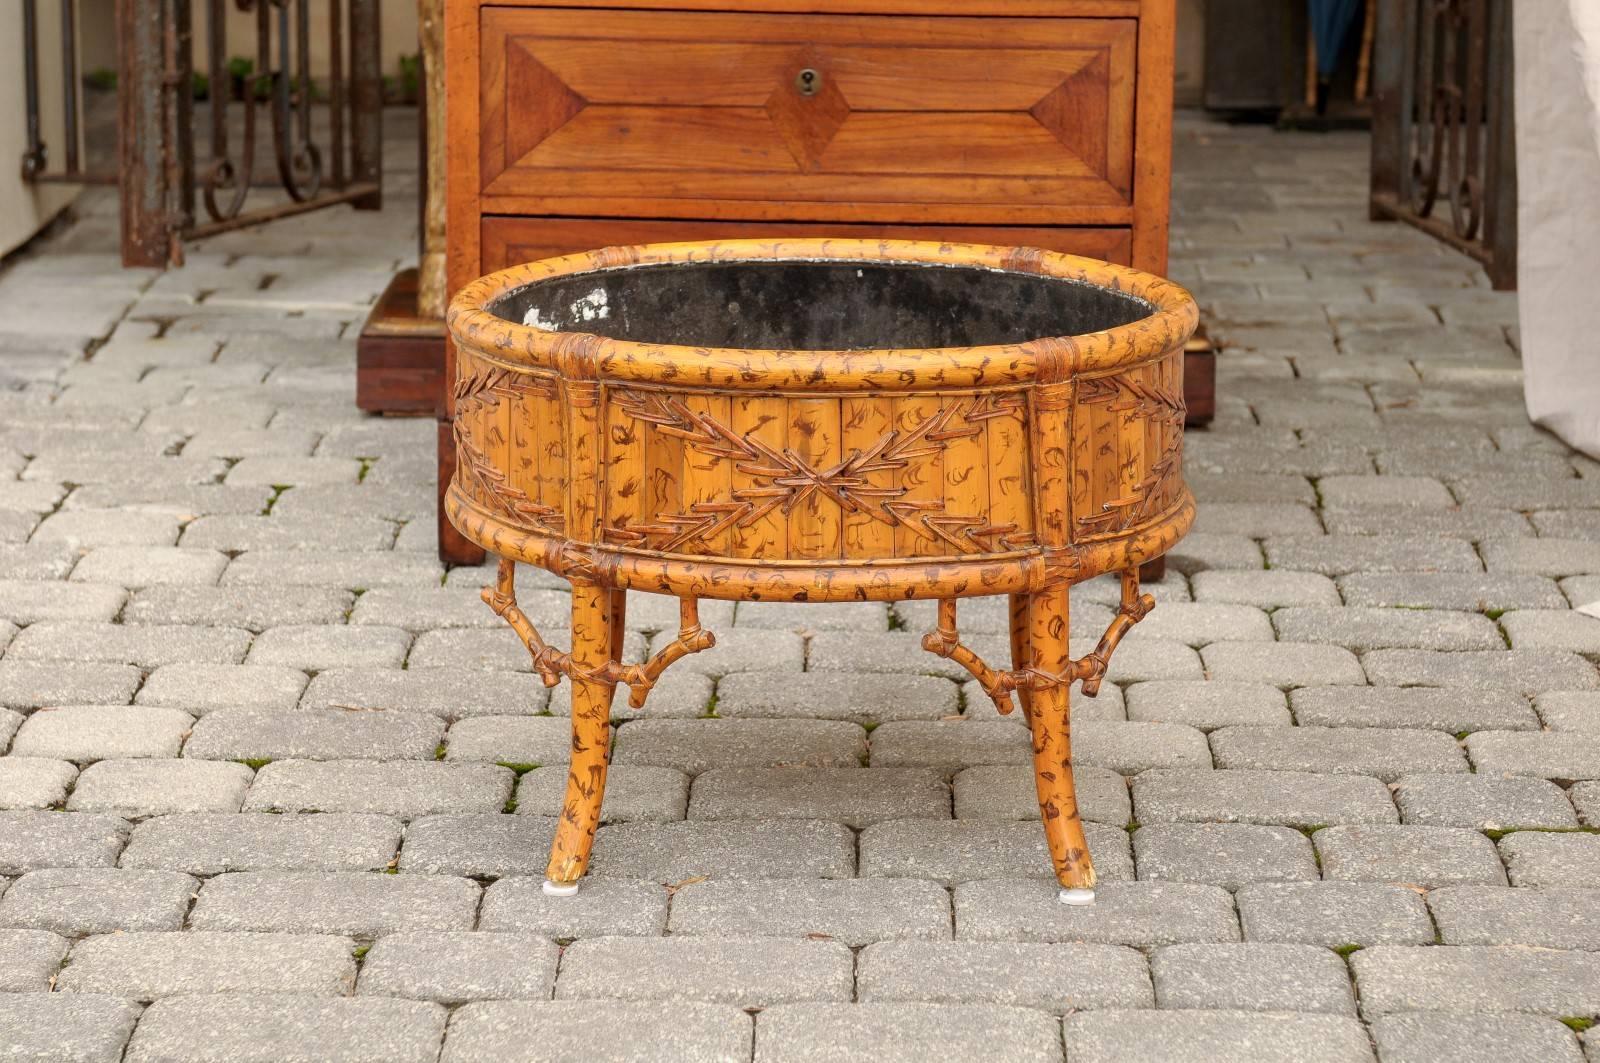 This French jardinière features a circular shaped made of faux-bamboo and is lined with metal on the inside. The planter is adorned on its surround with a wonderful faux-bamboo motif that includes wood, knots and stitches and is raised on four short